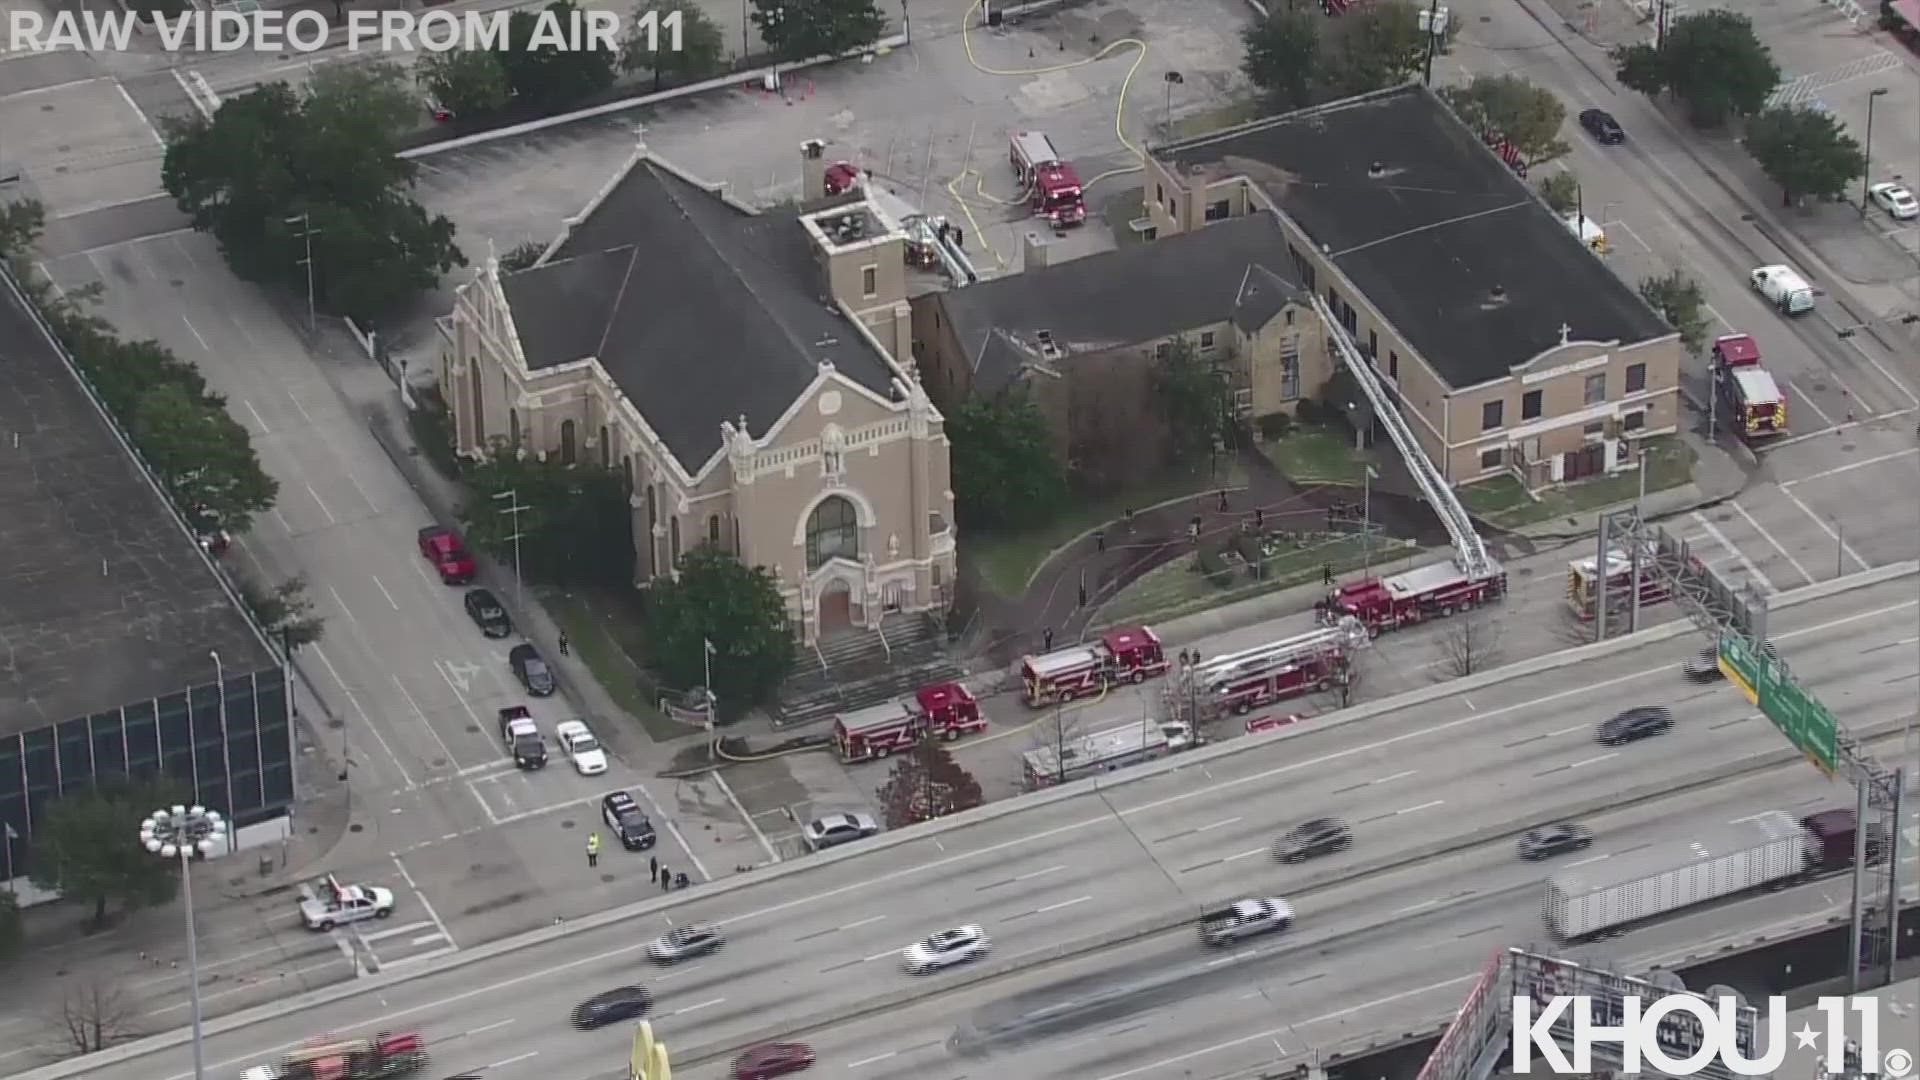 An investigation is underway after a 2-alarm church fire in downtown Houston. The Houston fire chief said the building was the old Co-Cathedral church.